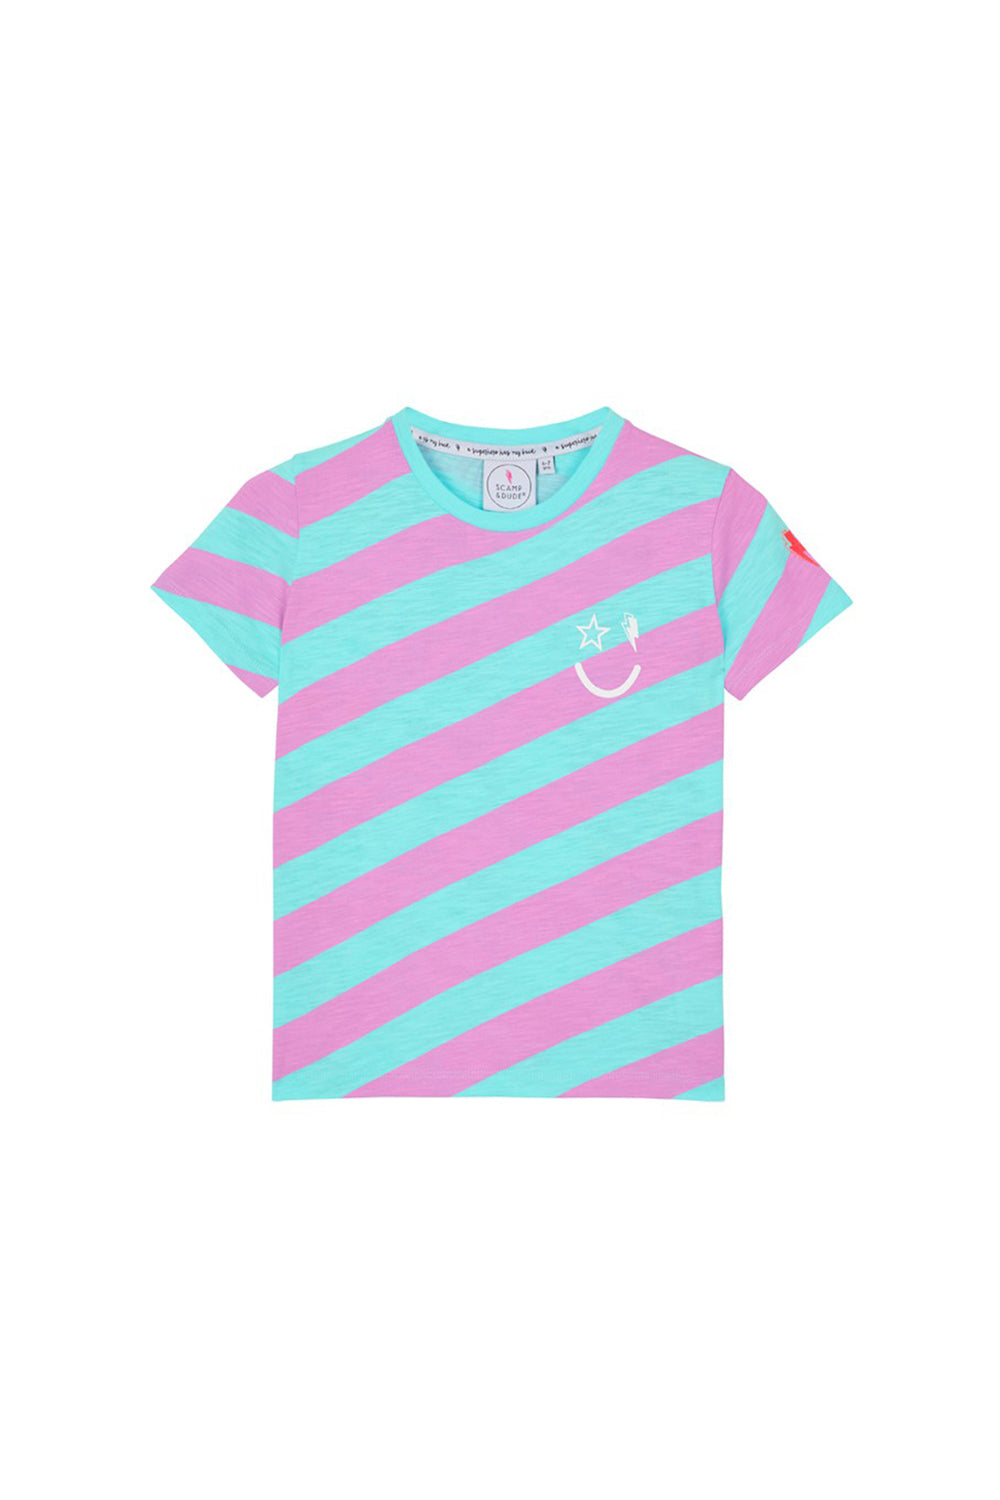 Kids Turquoise and Lilac Stripe T-Shirt